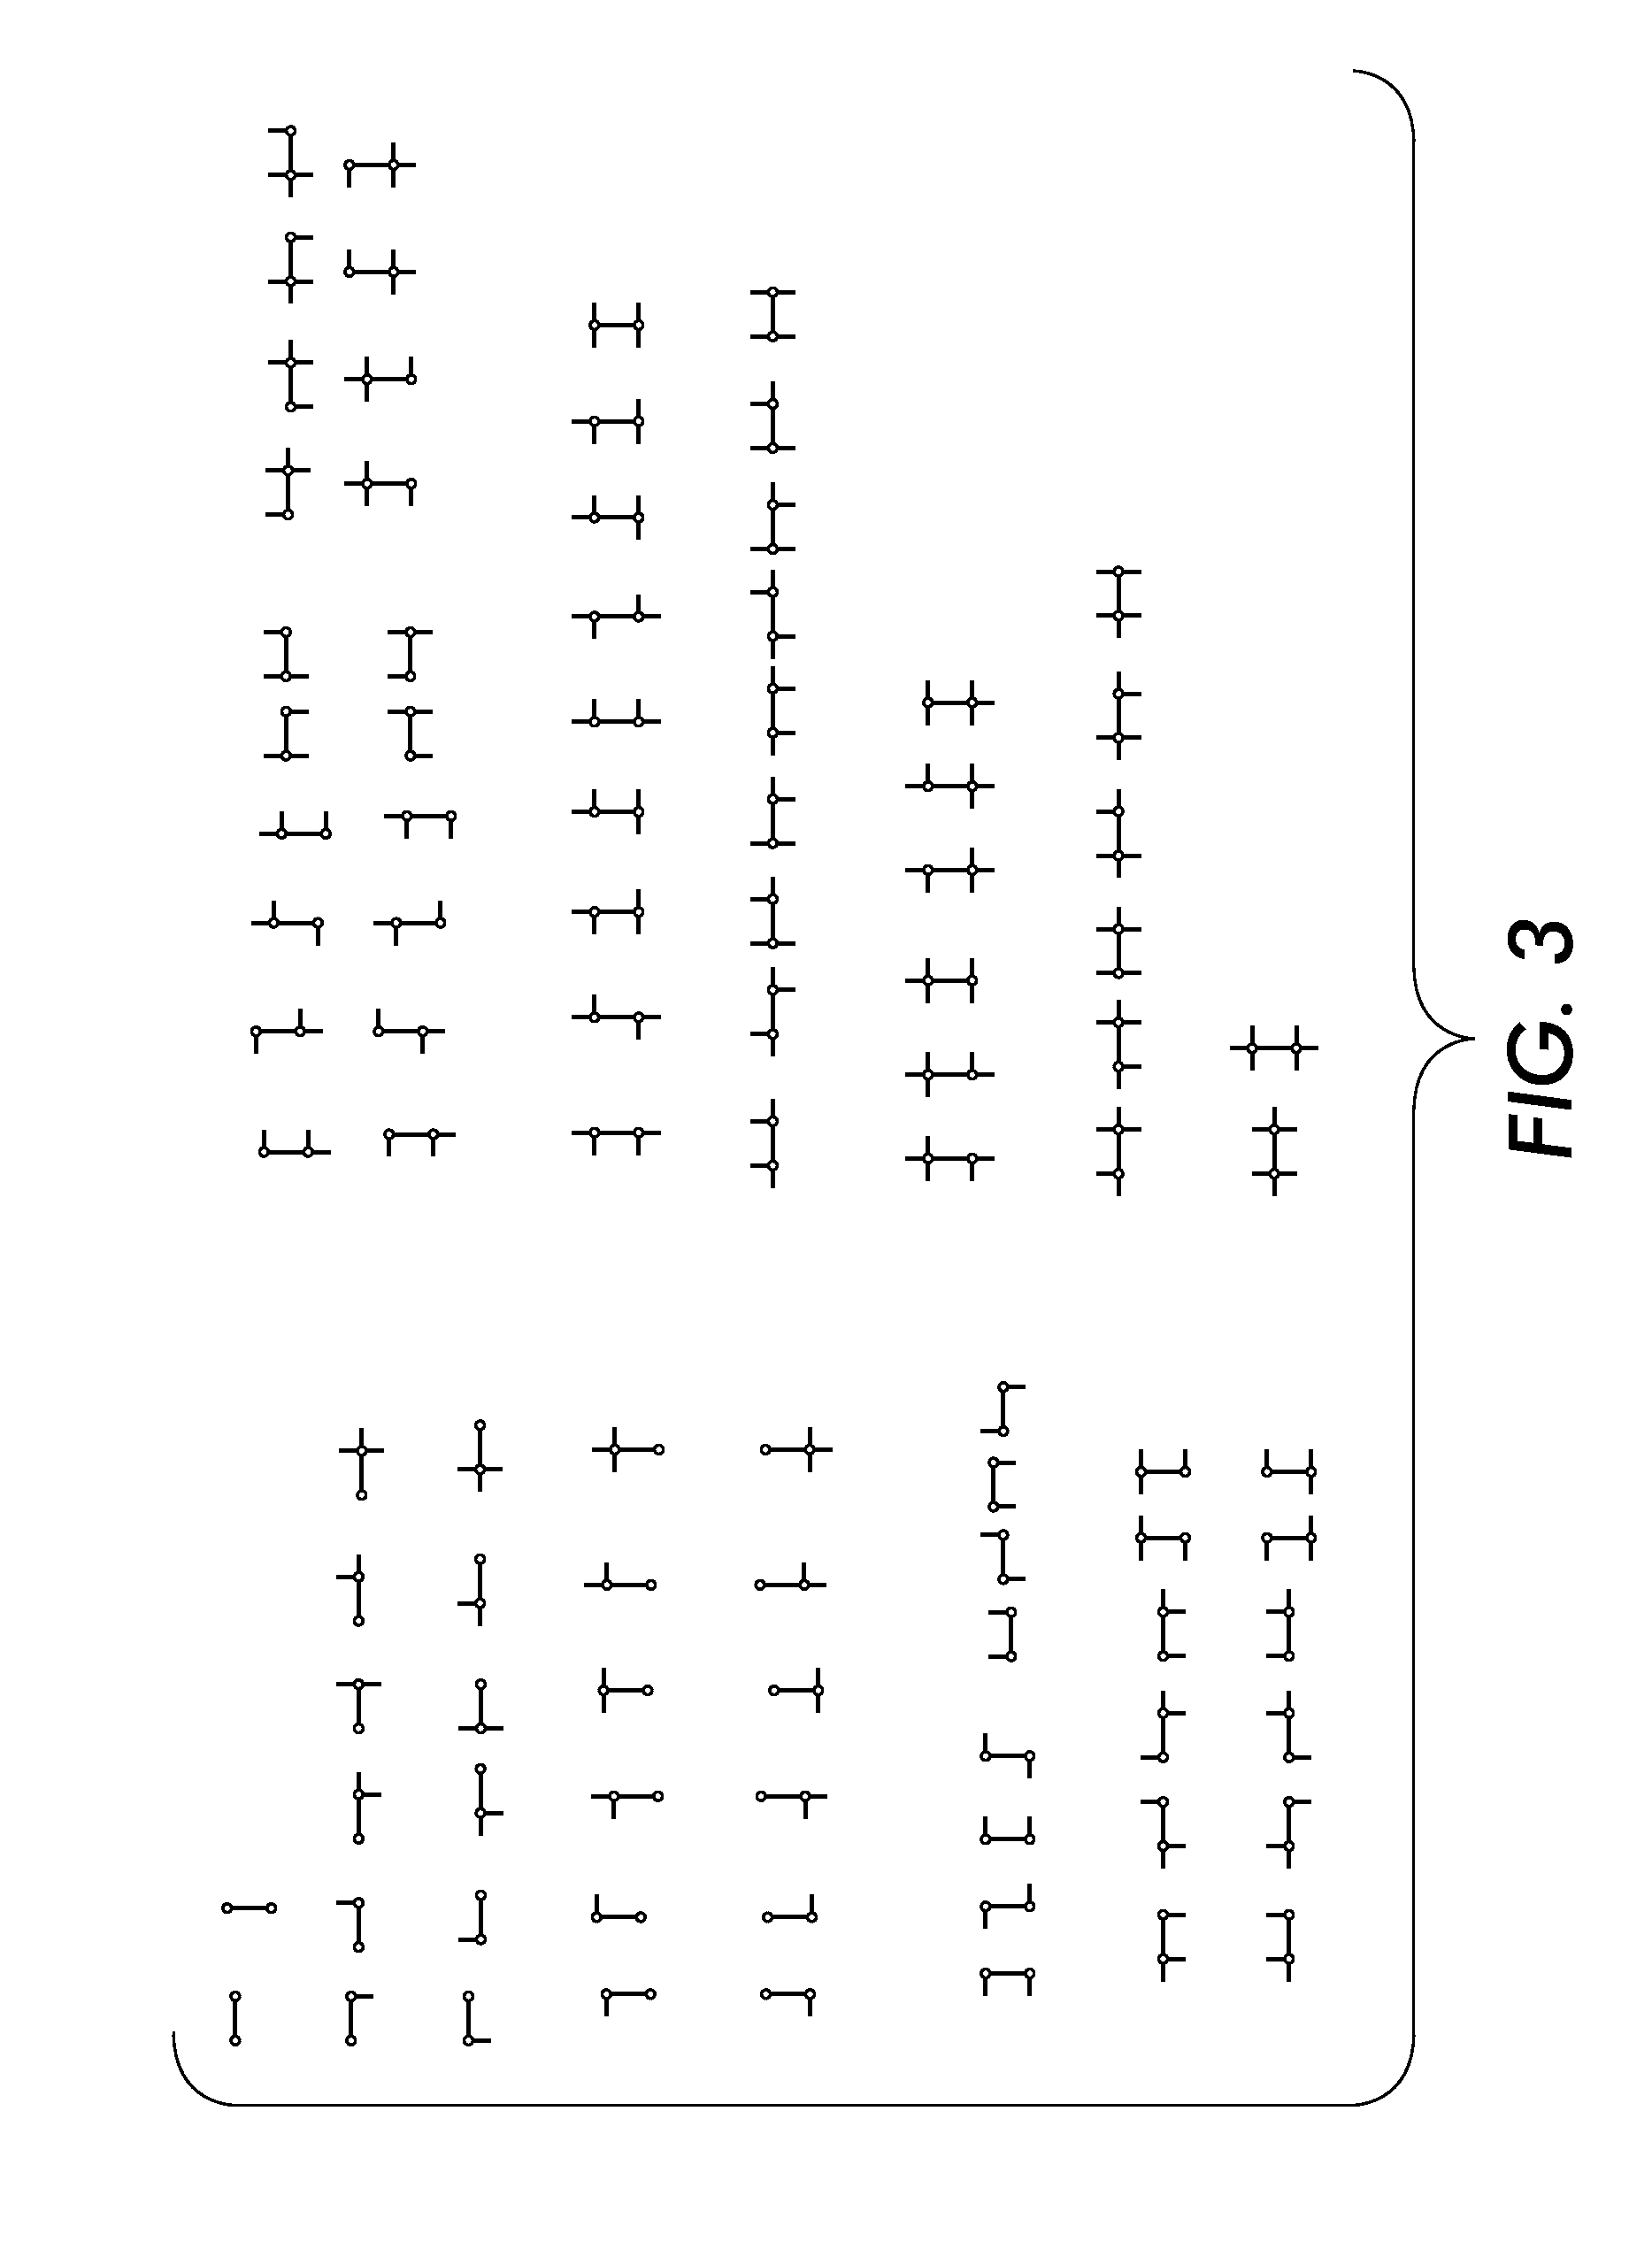 Method for generating a graph lattice from a corpus of one or more data graphs